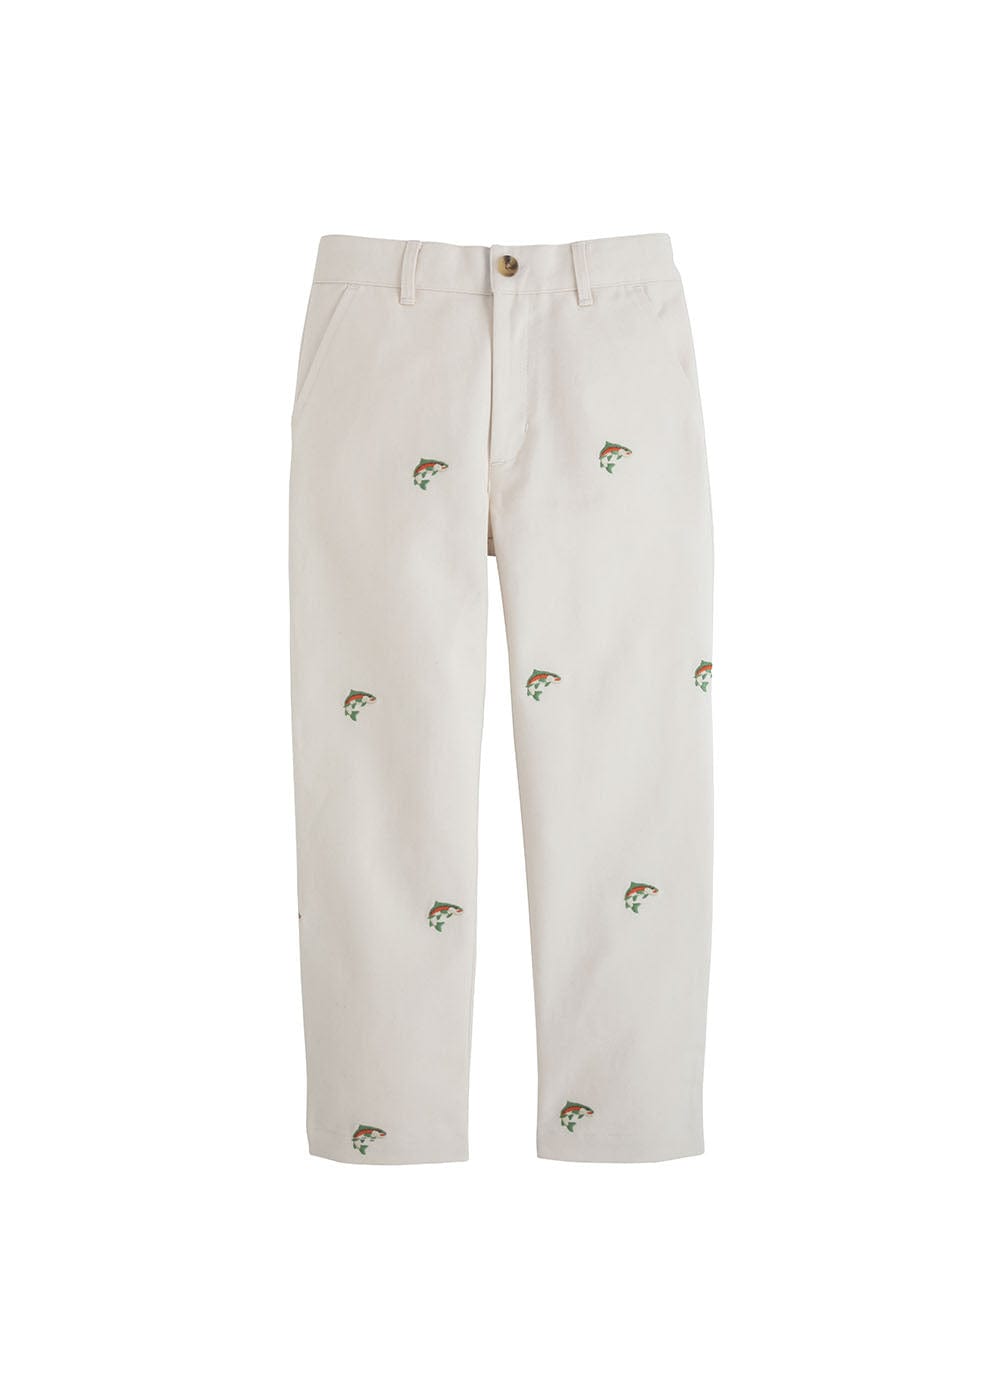 classic childrens clothing boys pant in khaki with embroidered trout pattern